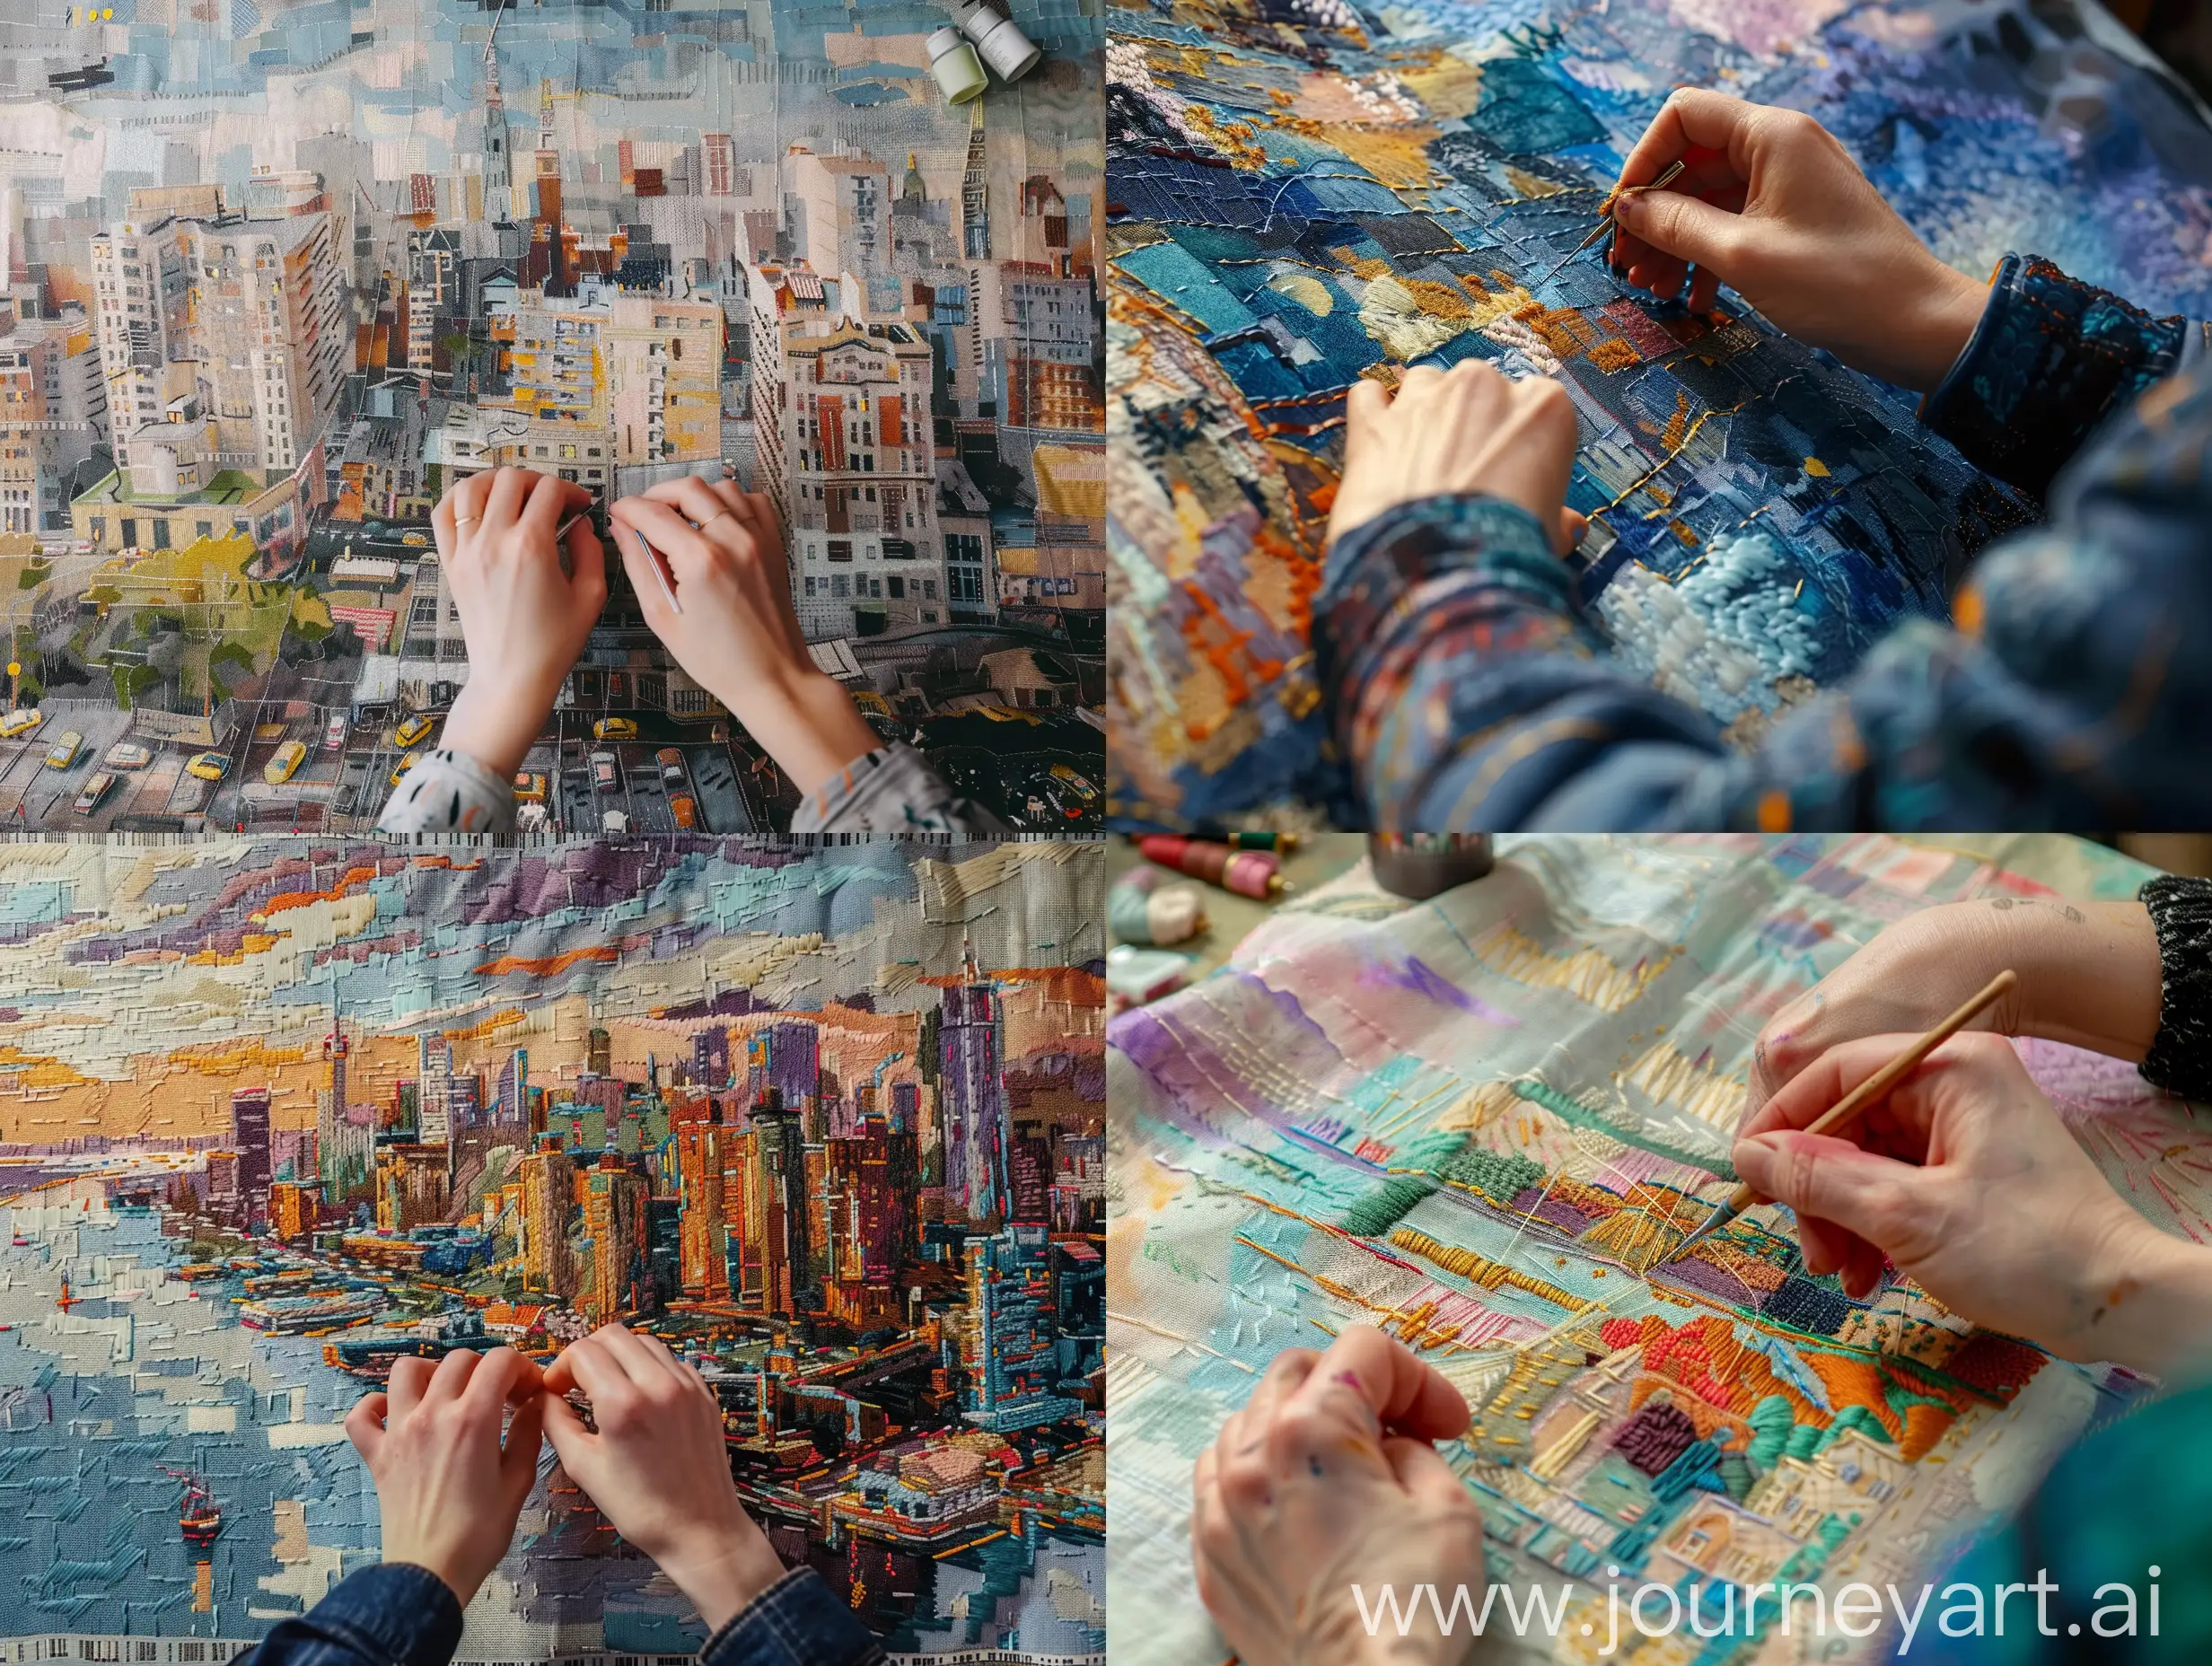 Embroidering-Urban-Landscape-Panorama-in-FirstPerson-View